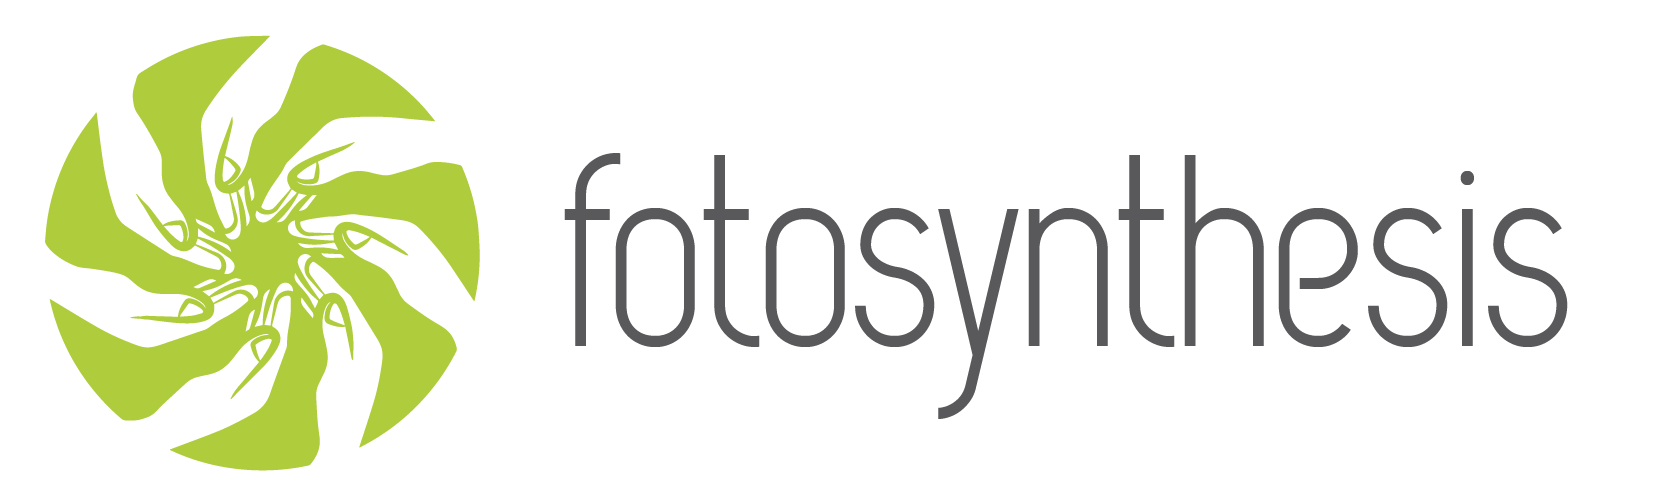 Fotosynthesis